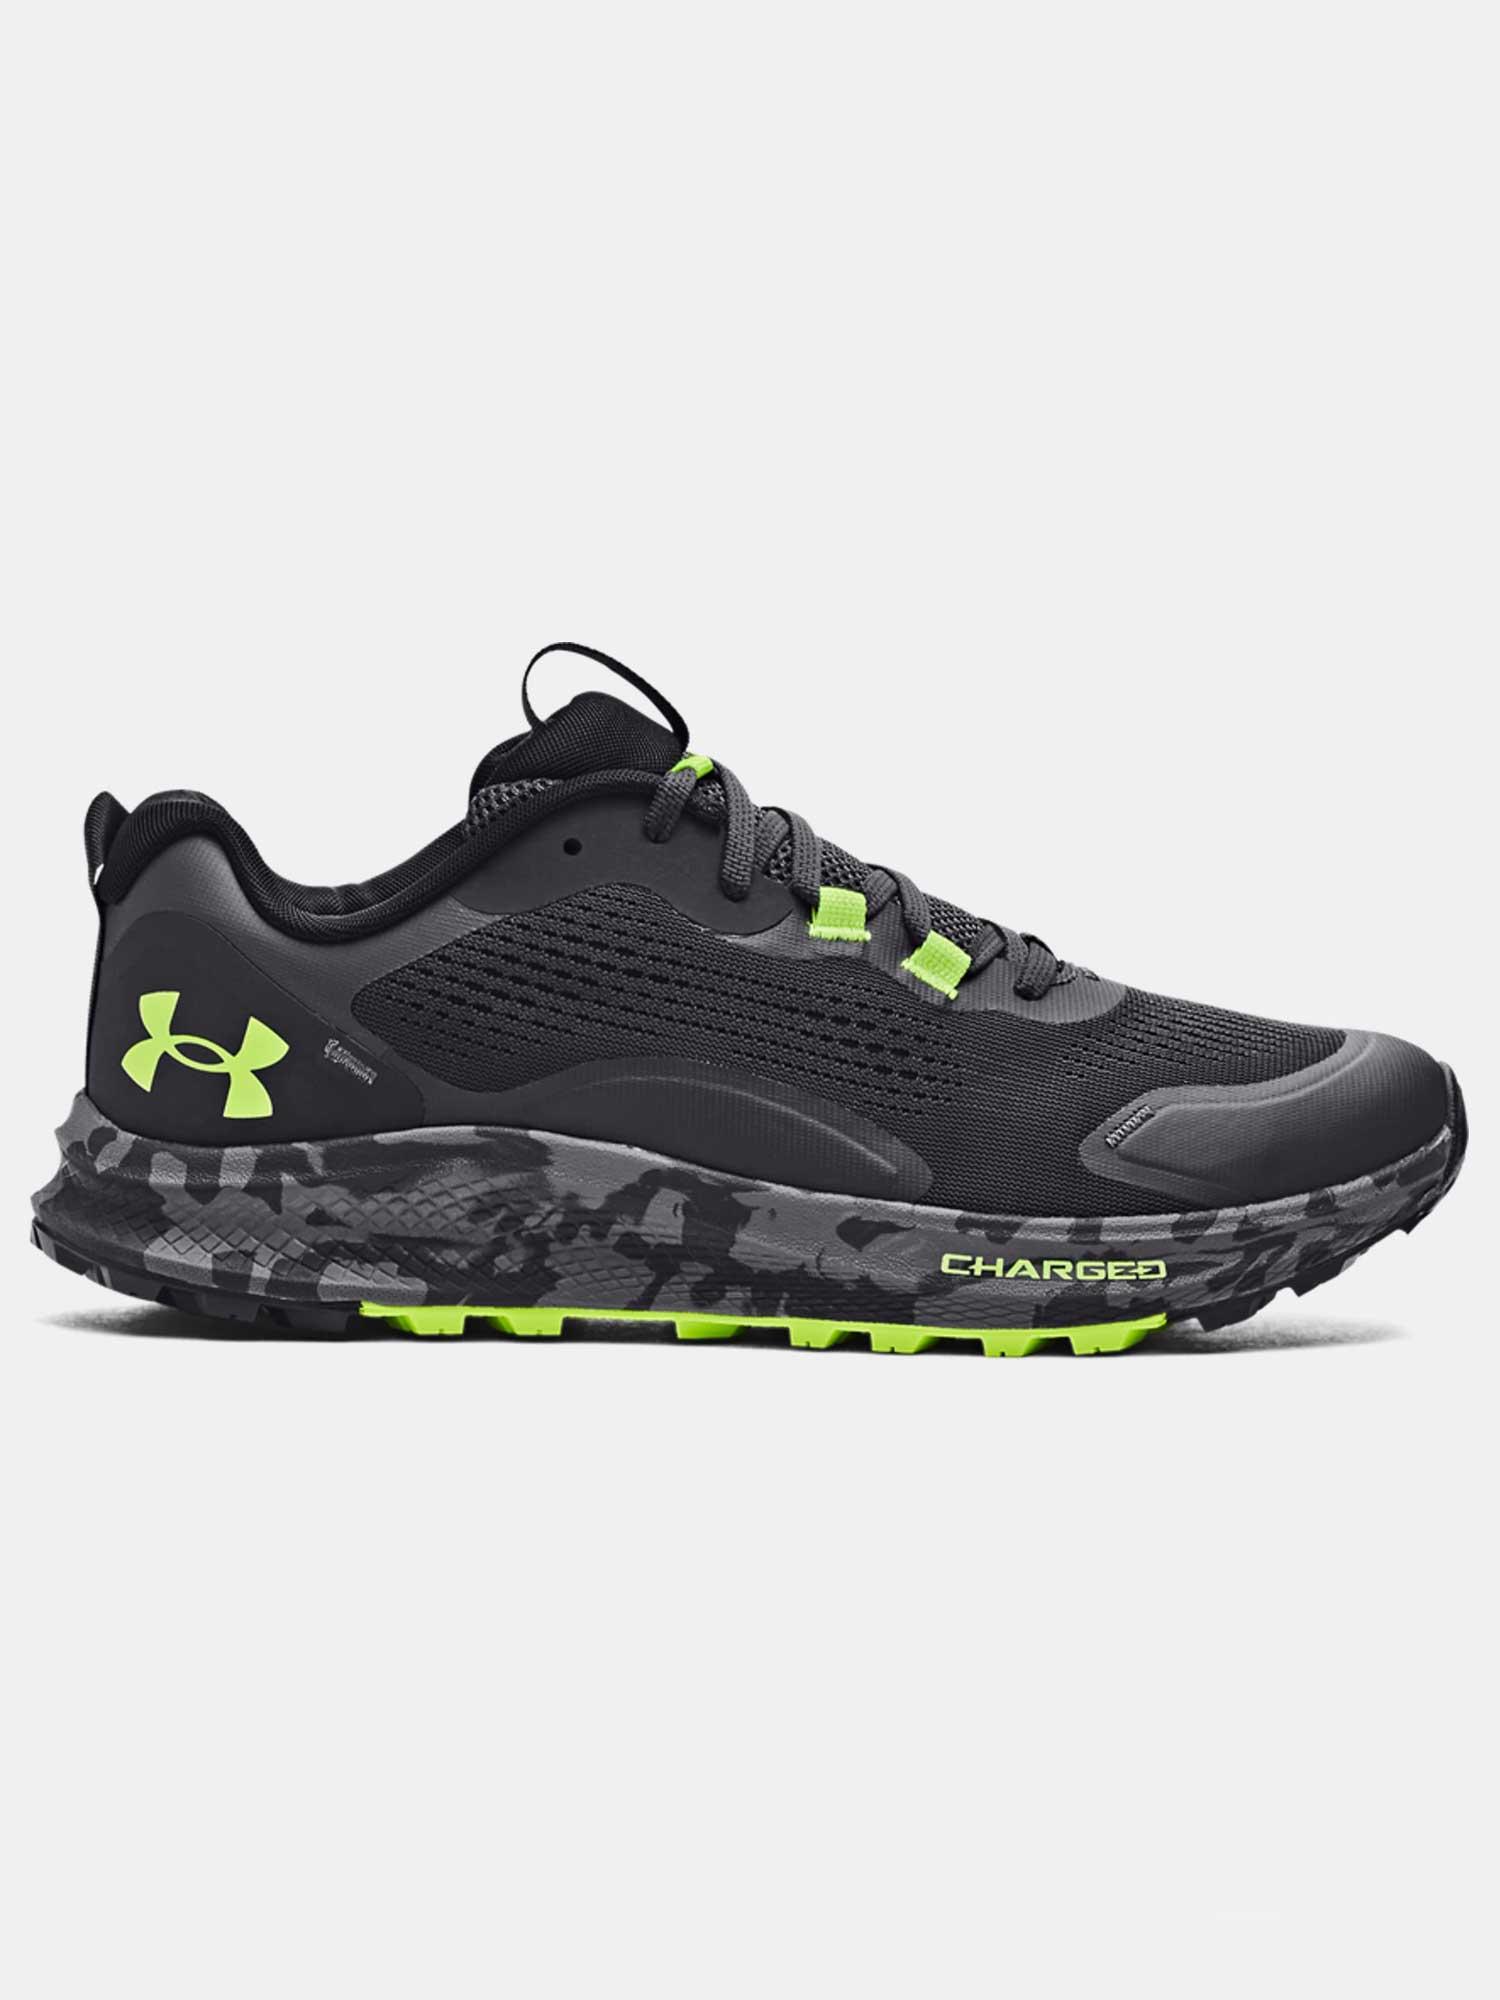 UNDER ARMOUR Charged Bandit TR 2 Shoes Muške patike siva